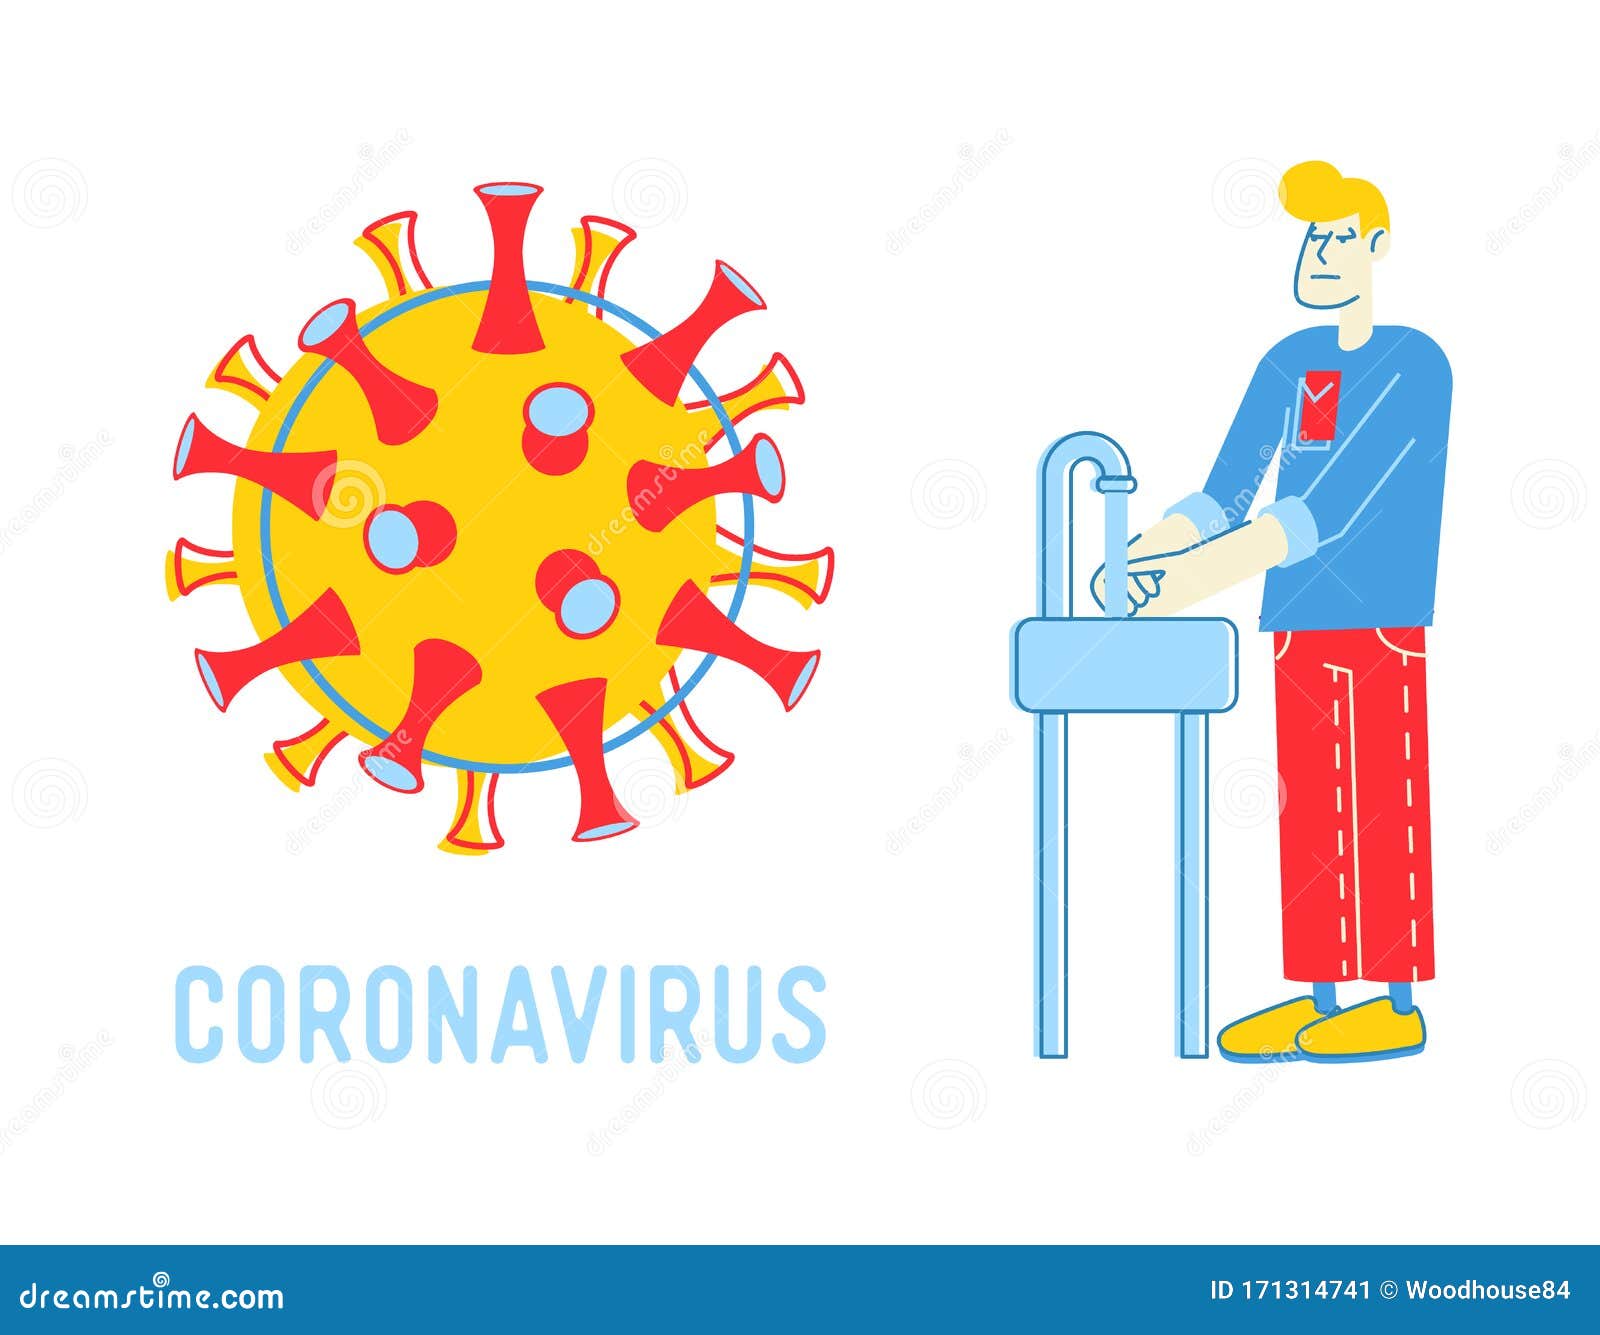 precautionary hygienic measures for coronavirus protection concept. man washing hands in bathroom with huge ncov cell